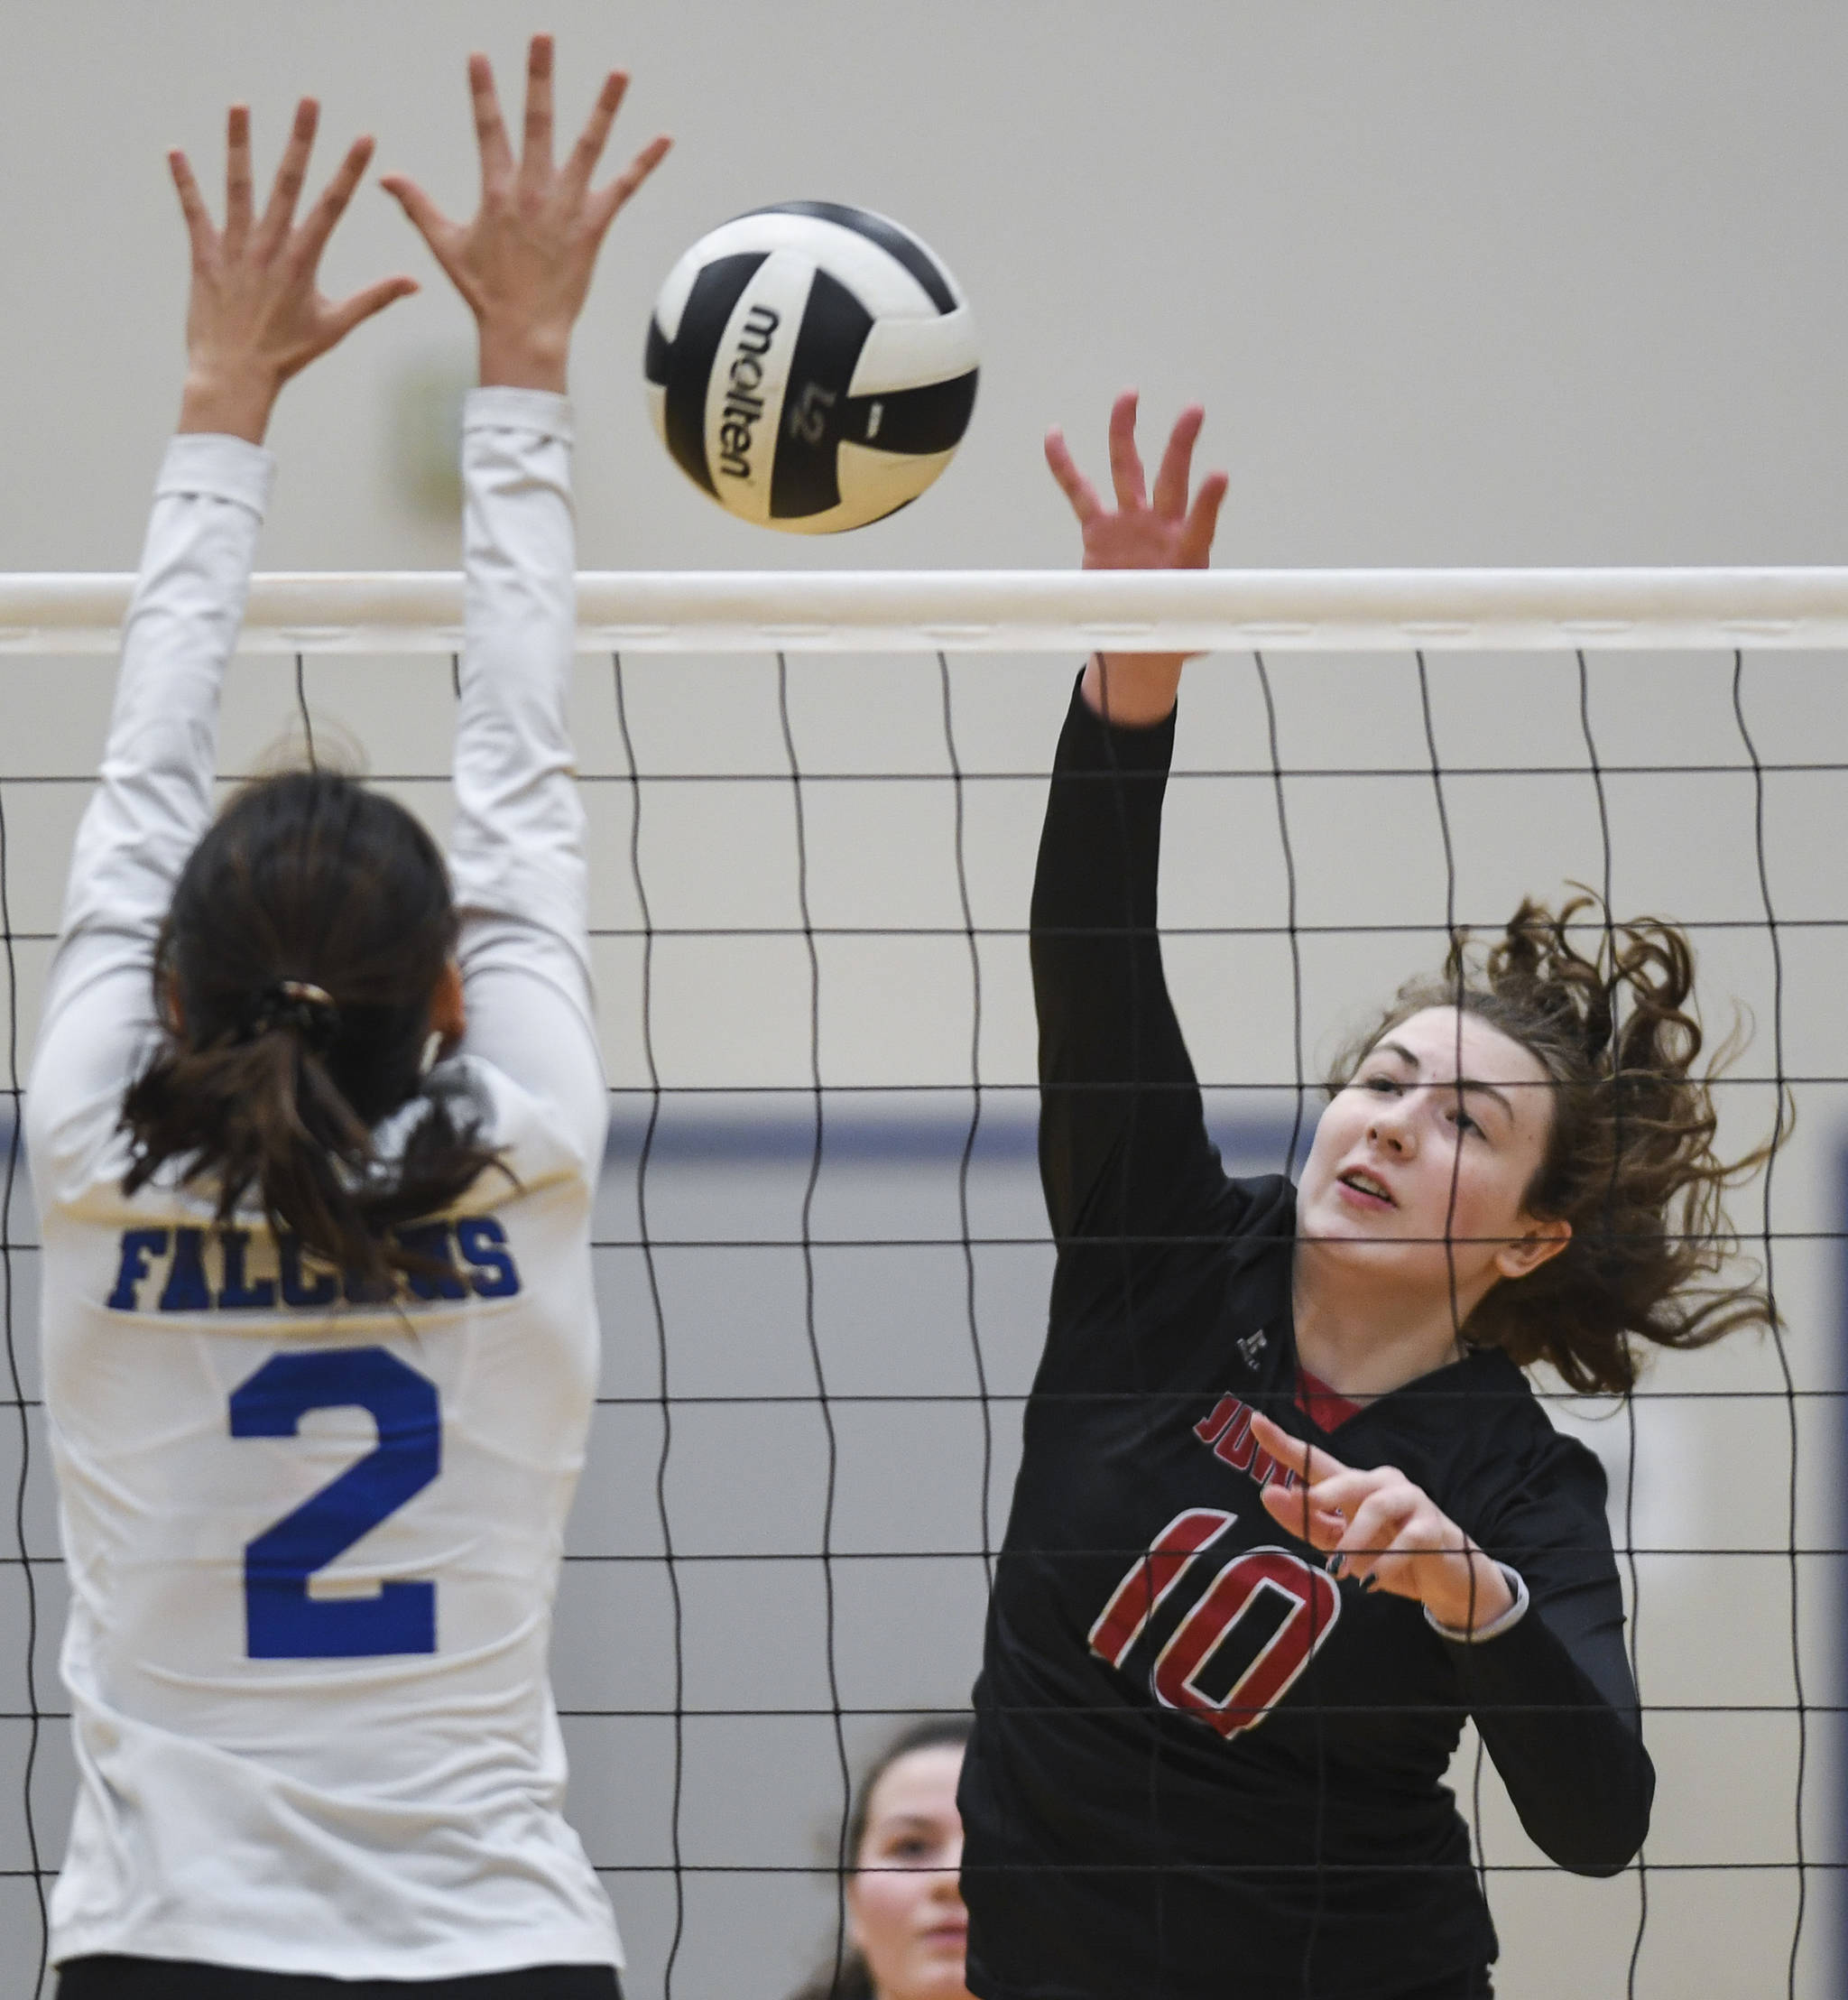 Juneau-Douglas’ Merry Newman spikes the ball against Thunder Mountain’s Amy Schoonover during the Region V Volleyball Tournament at Thunder Mountain High School on Friday, Nov. 8, 2019. JDHS won 25-22, 26-24, 25-20. (Michael Penn | Juneau Empire)